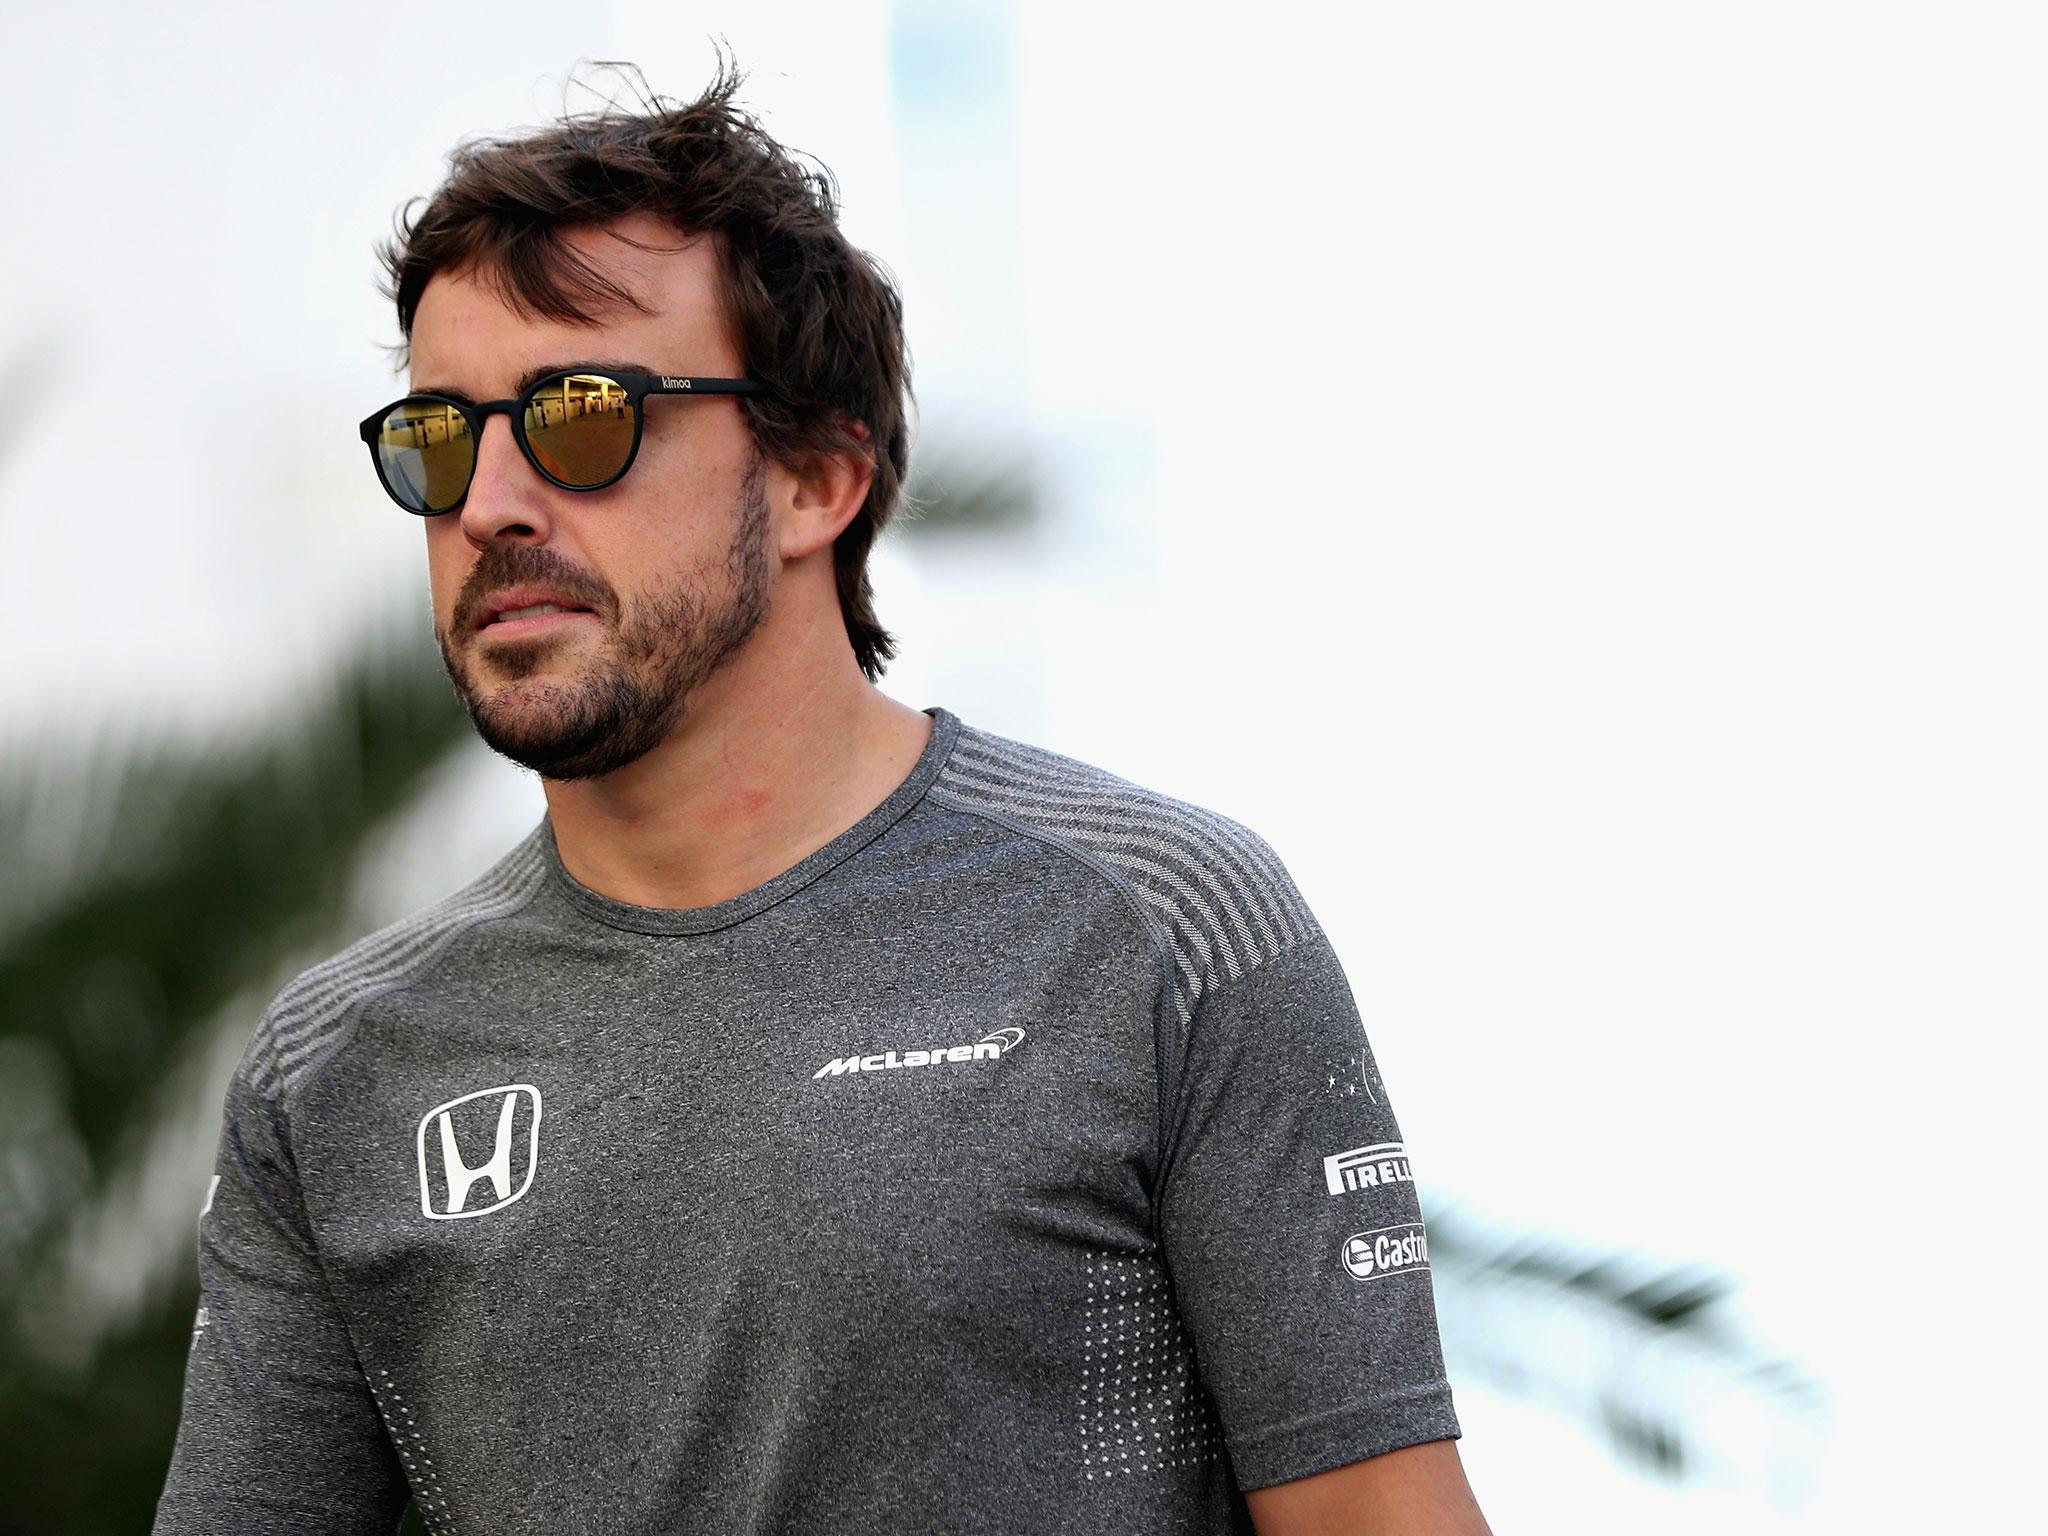 Fernandon Alonso will miss the Monaco GP to take part in the Indy 500